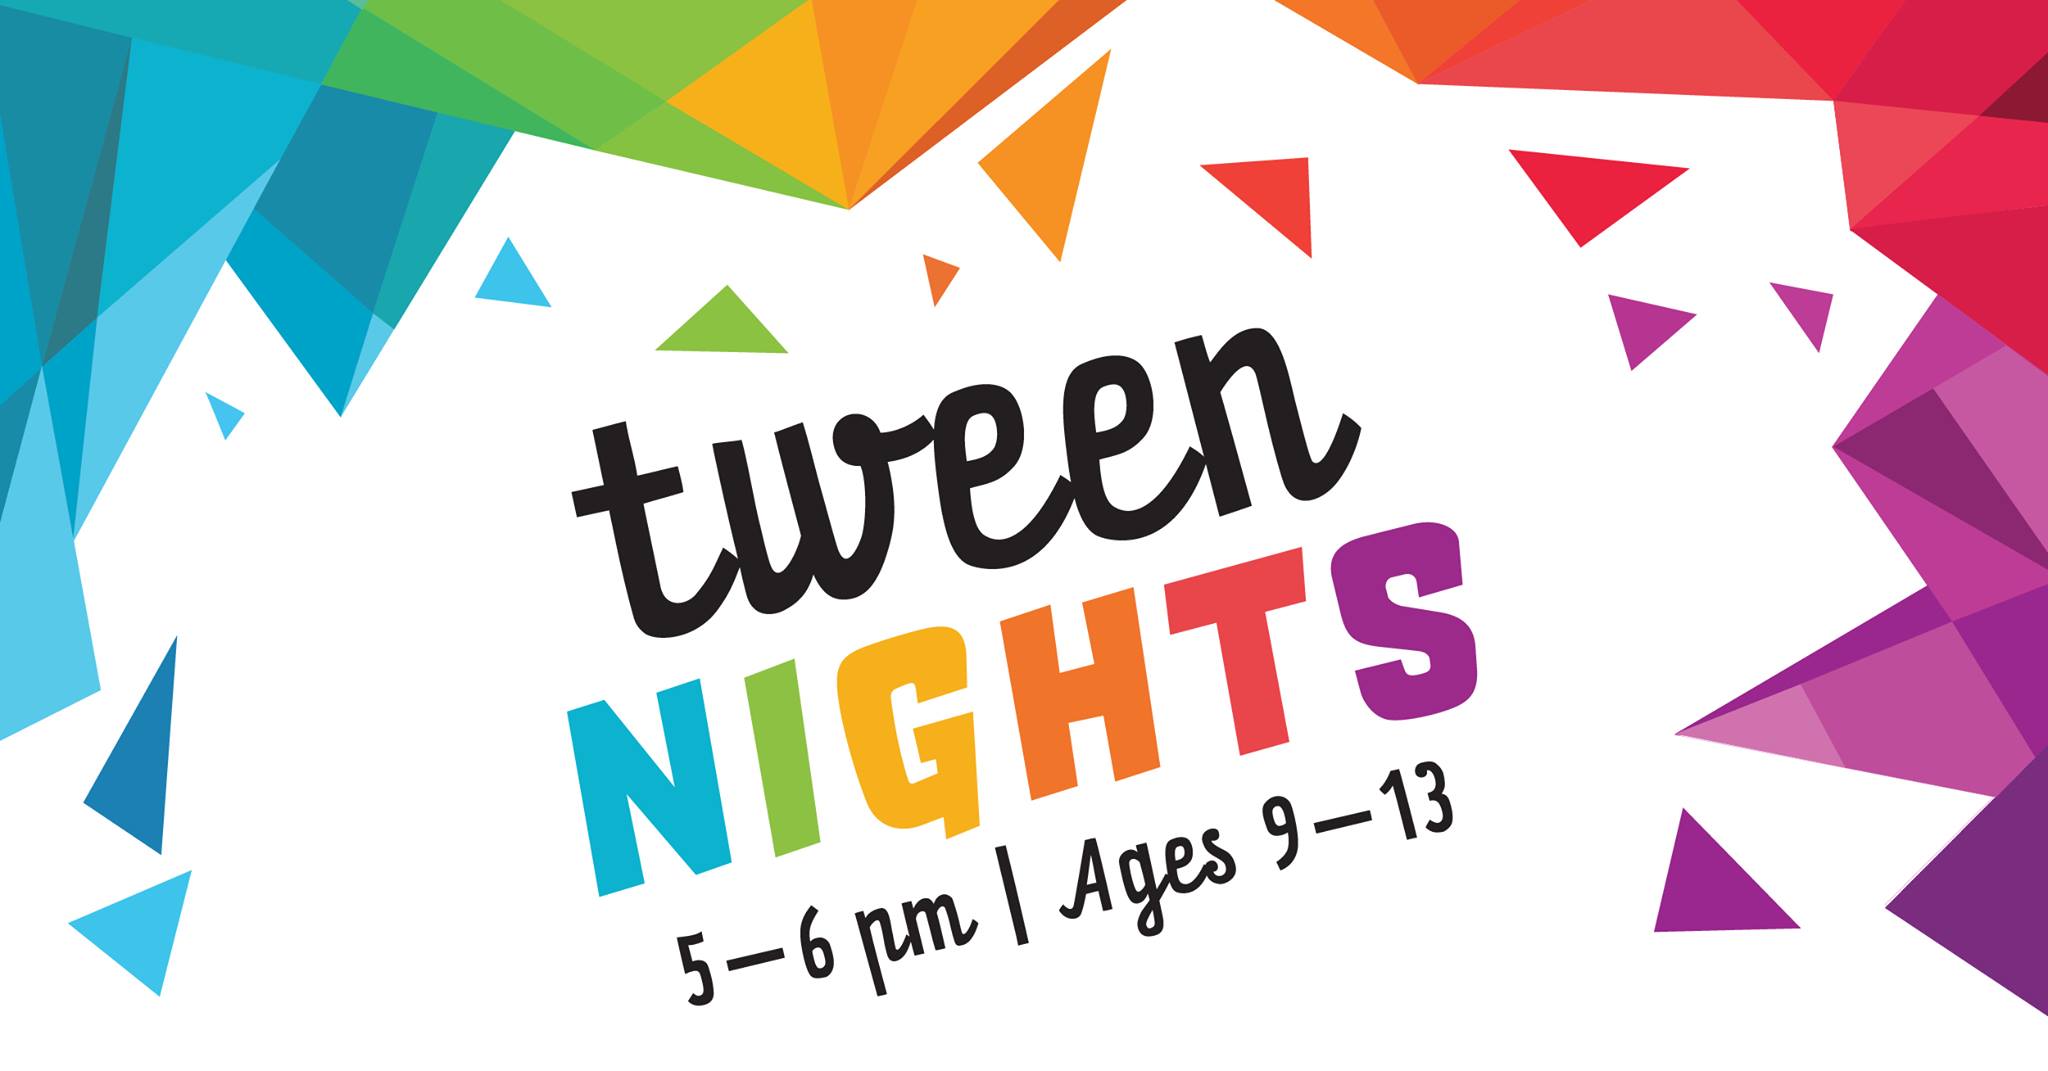 white background with jagged border in blue, green, yellow, orange, red, and purple. "tween" in black lowercase text is above "nights" in multicolor uppercase text. "5-6 pm ages 9-13" in black text below